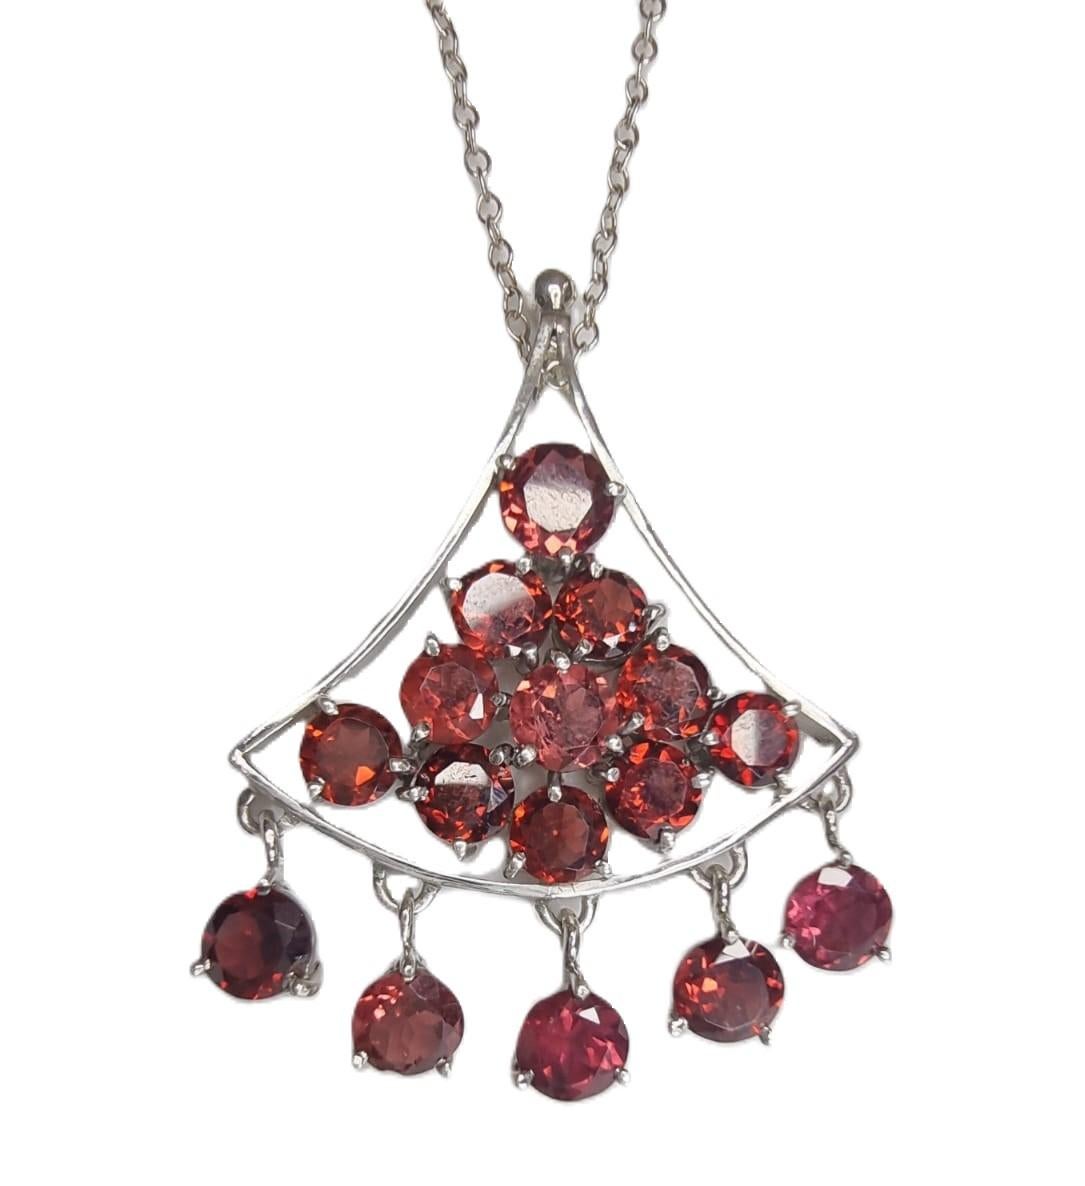 Introducing a stunning Garnet Pyramid Tassel Pendant, a captivating fusion of elegance and bold design. Crafted with meticulous attention to detail, this exquisite piece features a triangular pyramid-shaped pendant adorned with a dazzling array of